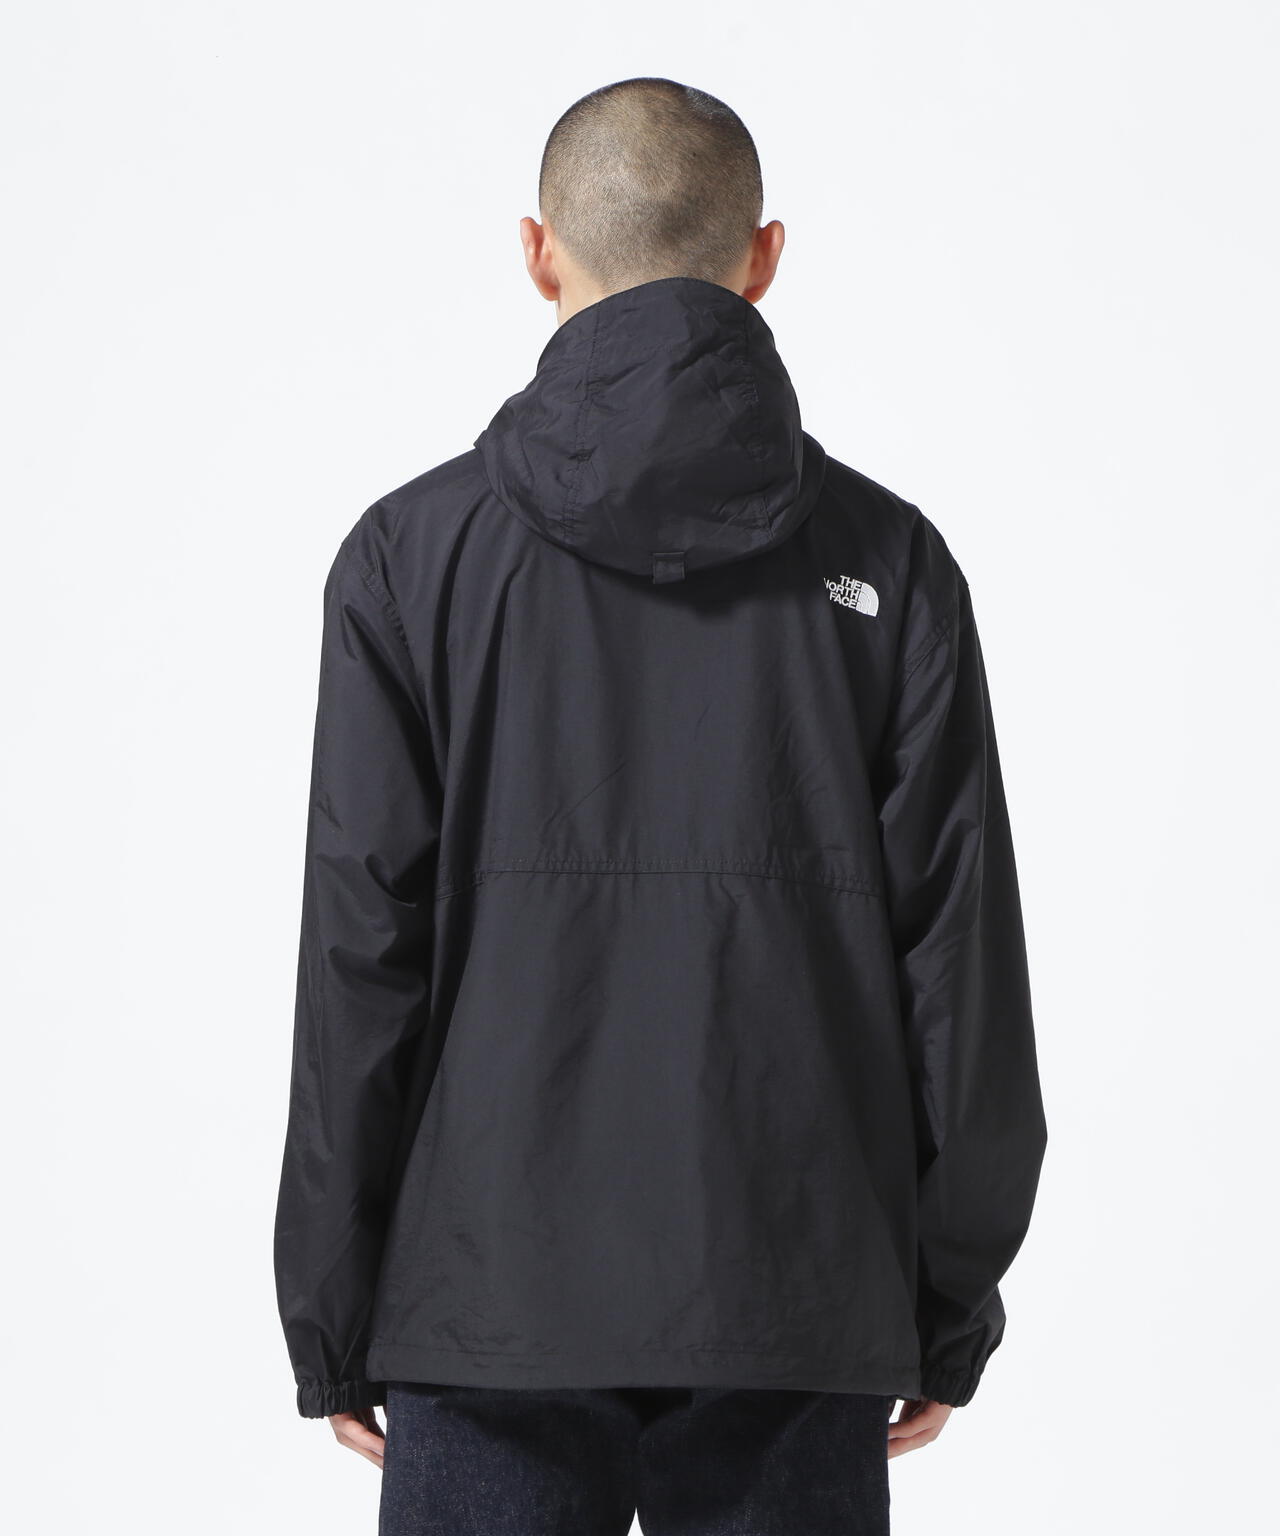 THE NORTH FACE/ザ・ノースフェイス/Compact Jacket/コンパクト 